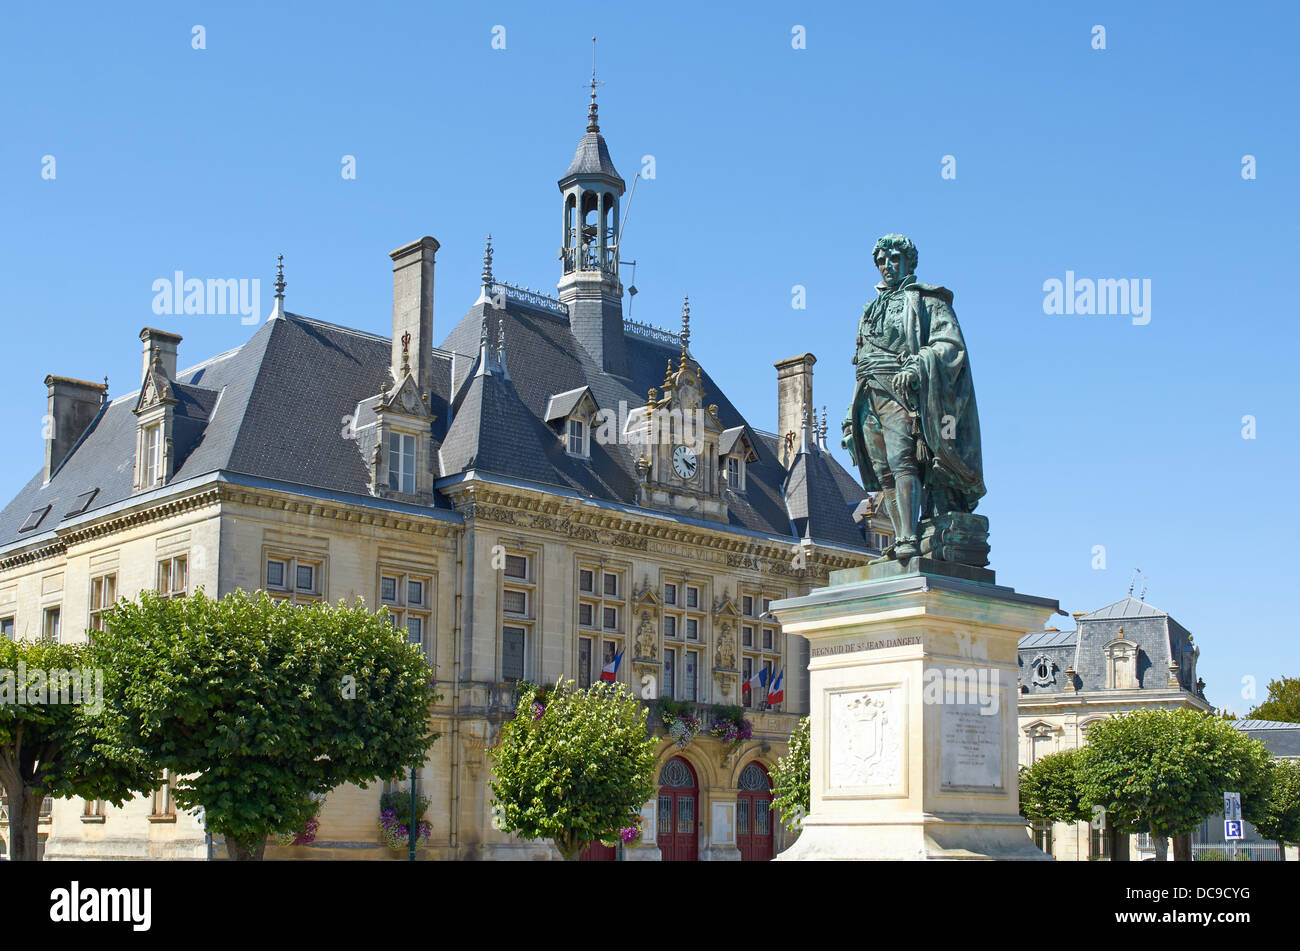 Jean d'Angely with bronze statue of Regnaud de St Jean d'Angely, Charente Maritime, France, city hall Stock Photo